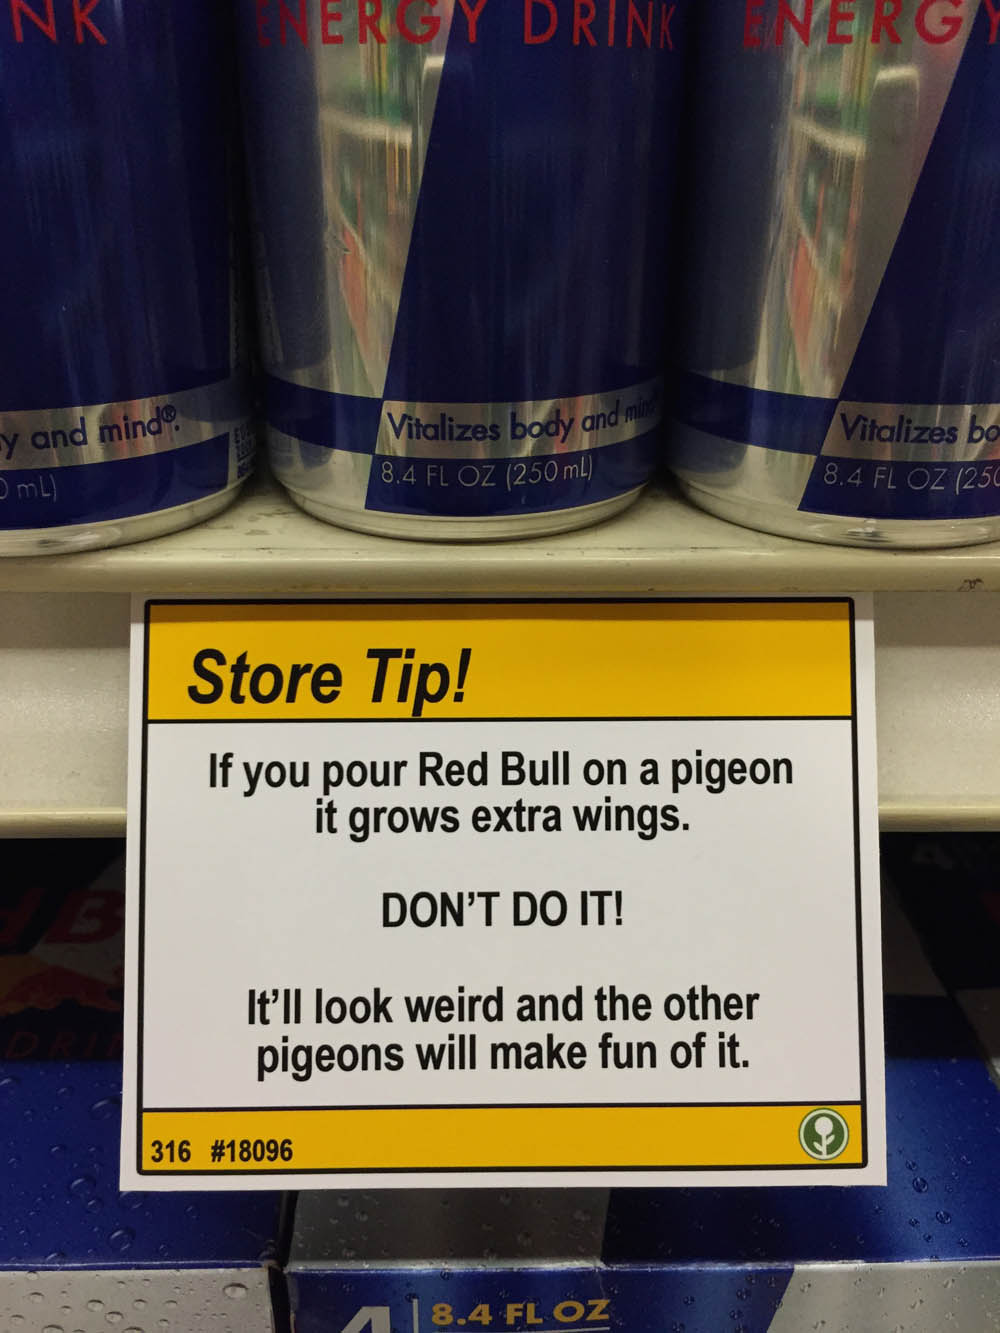 hilarious prank - Nr Ergy Drinknergi and mind Vitalizes body and mi 8.4 Fl Oz 250 ml Vitalizes bo 8.4 Fl Oz 250 Store Tip! If you pour Red Bull on a pigeon it grows extra wings. Don'T Do It! It'll look weird and the other pigeons will make fun of it. 316 